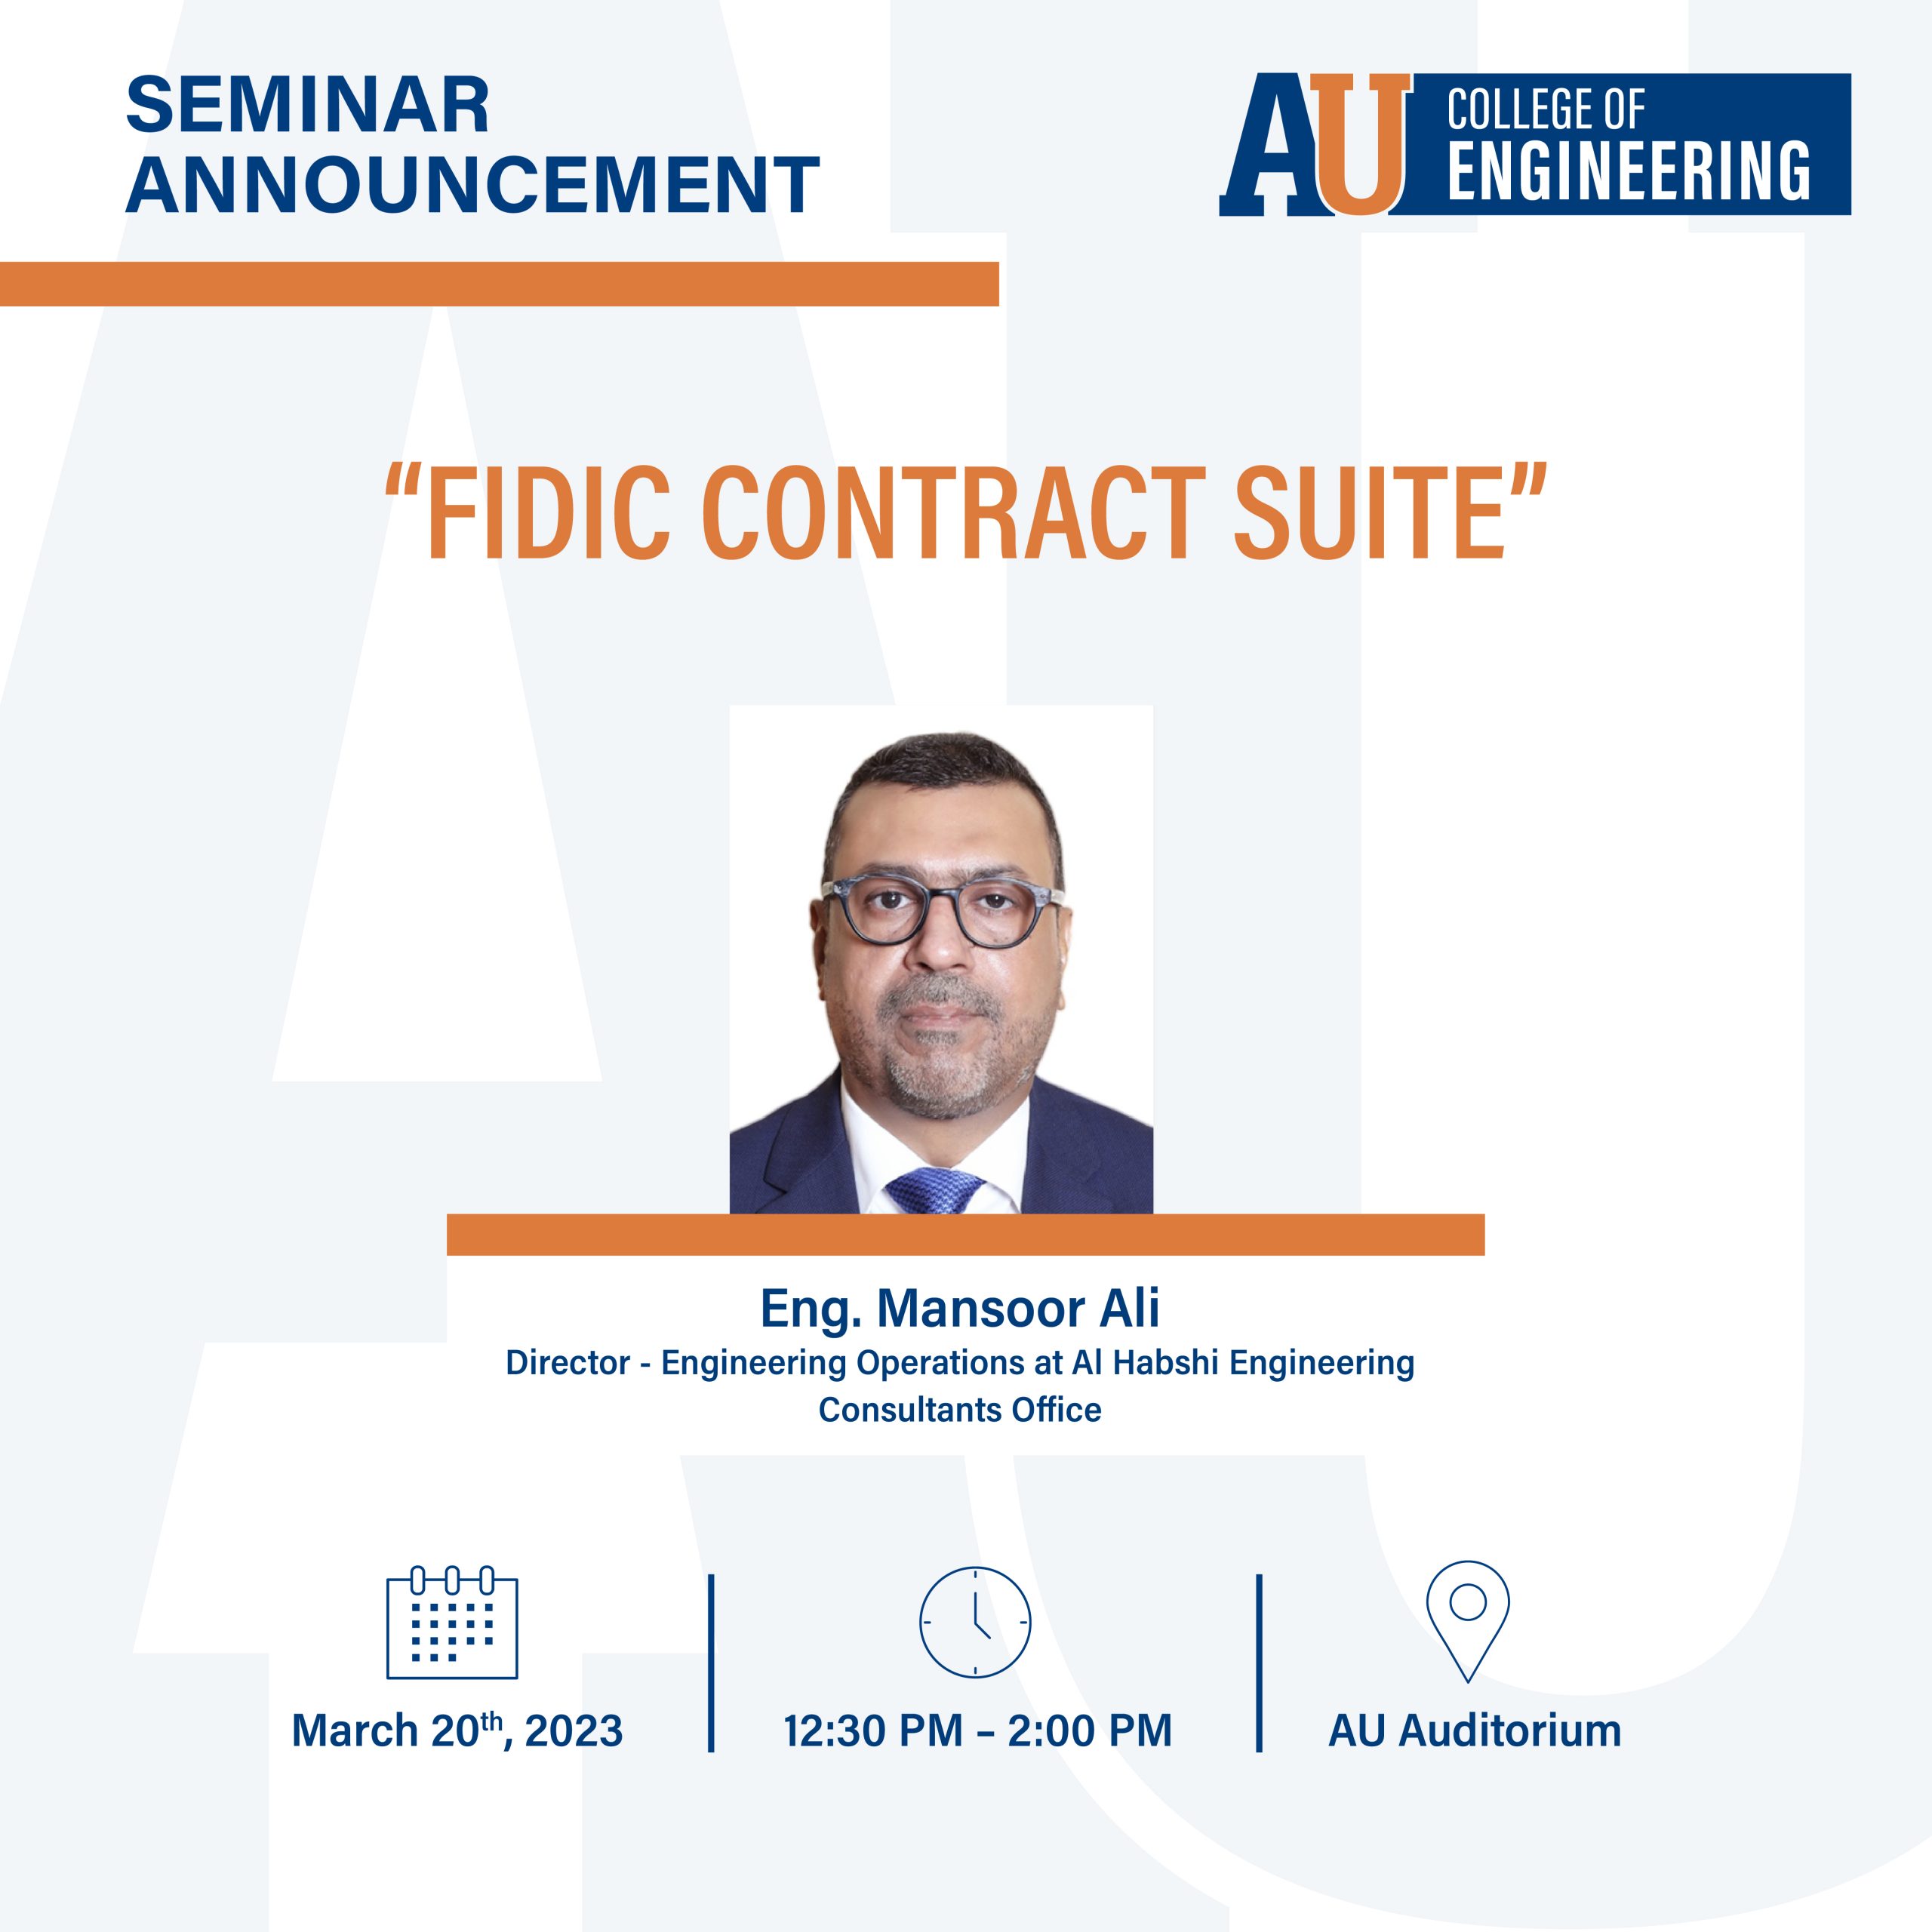 FIDIC CONTRACT SUITE